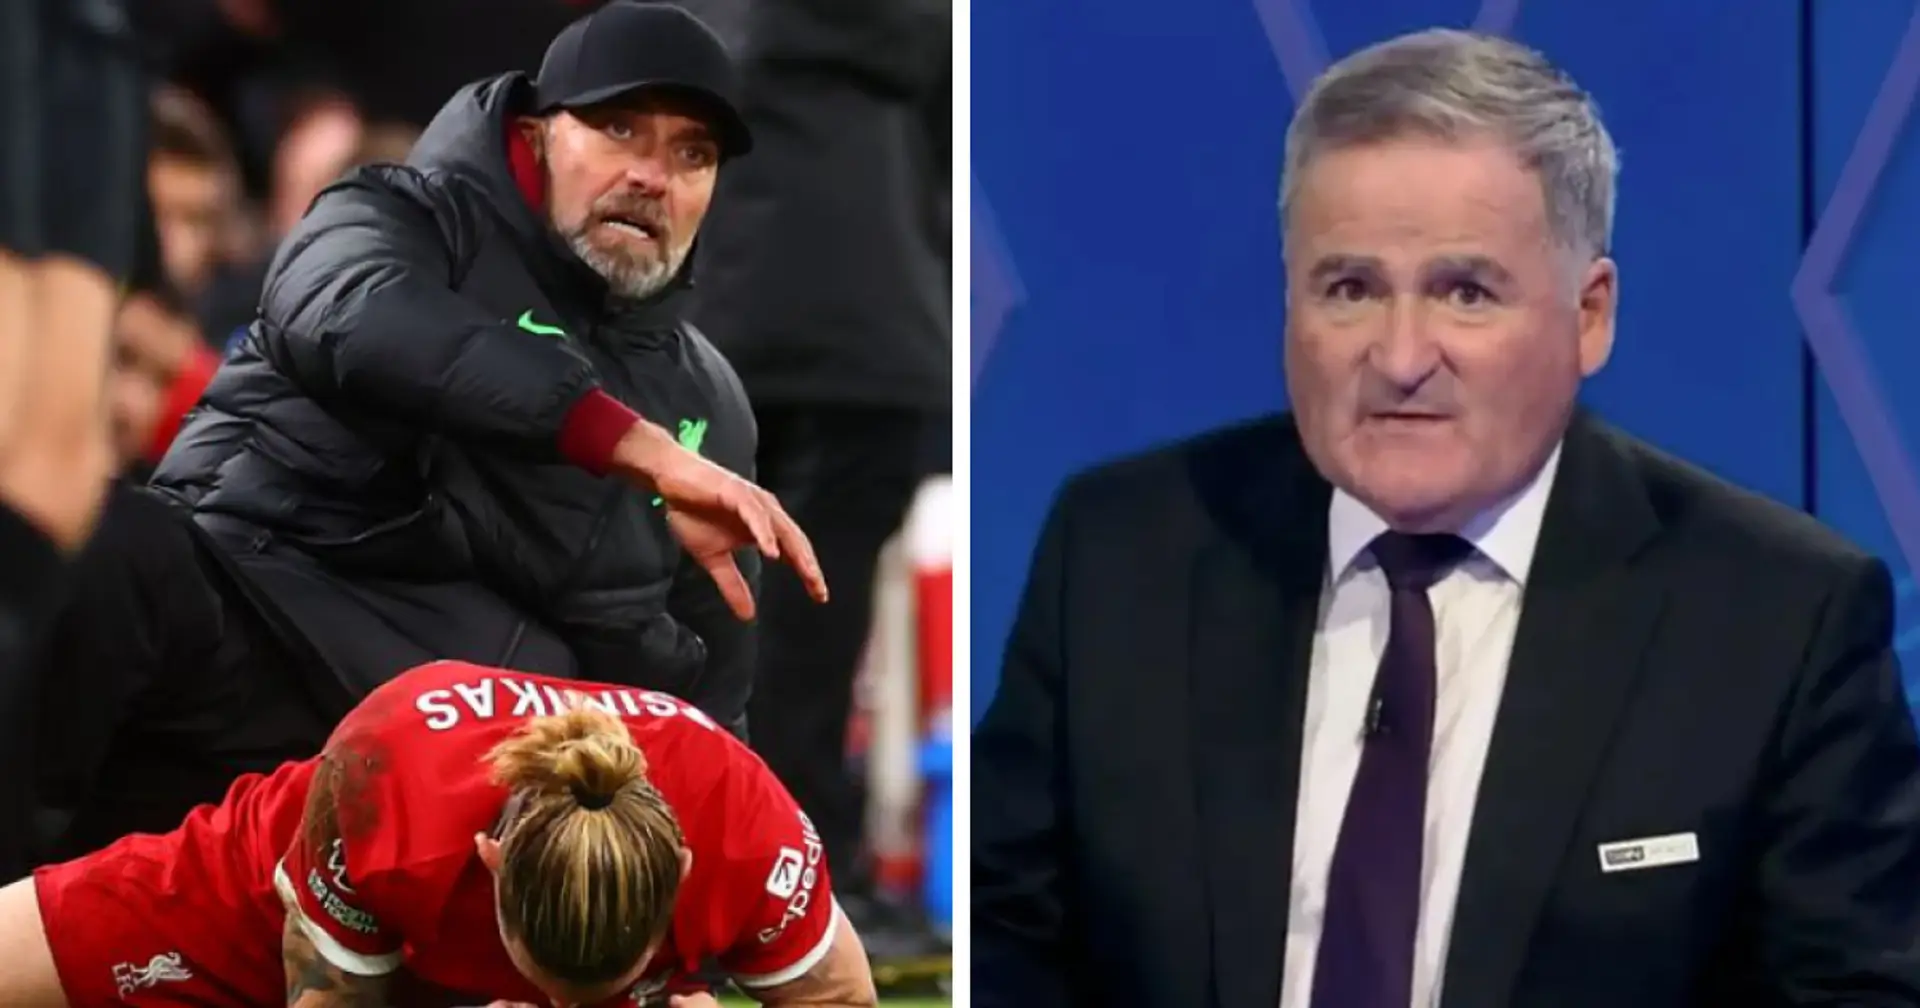 'It's an irony that it's Klopp': Liverpool coach is blamed after Tsimikas injury